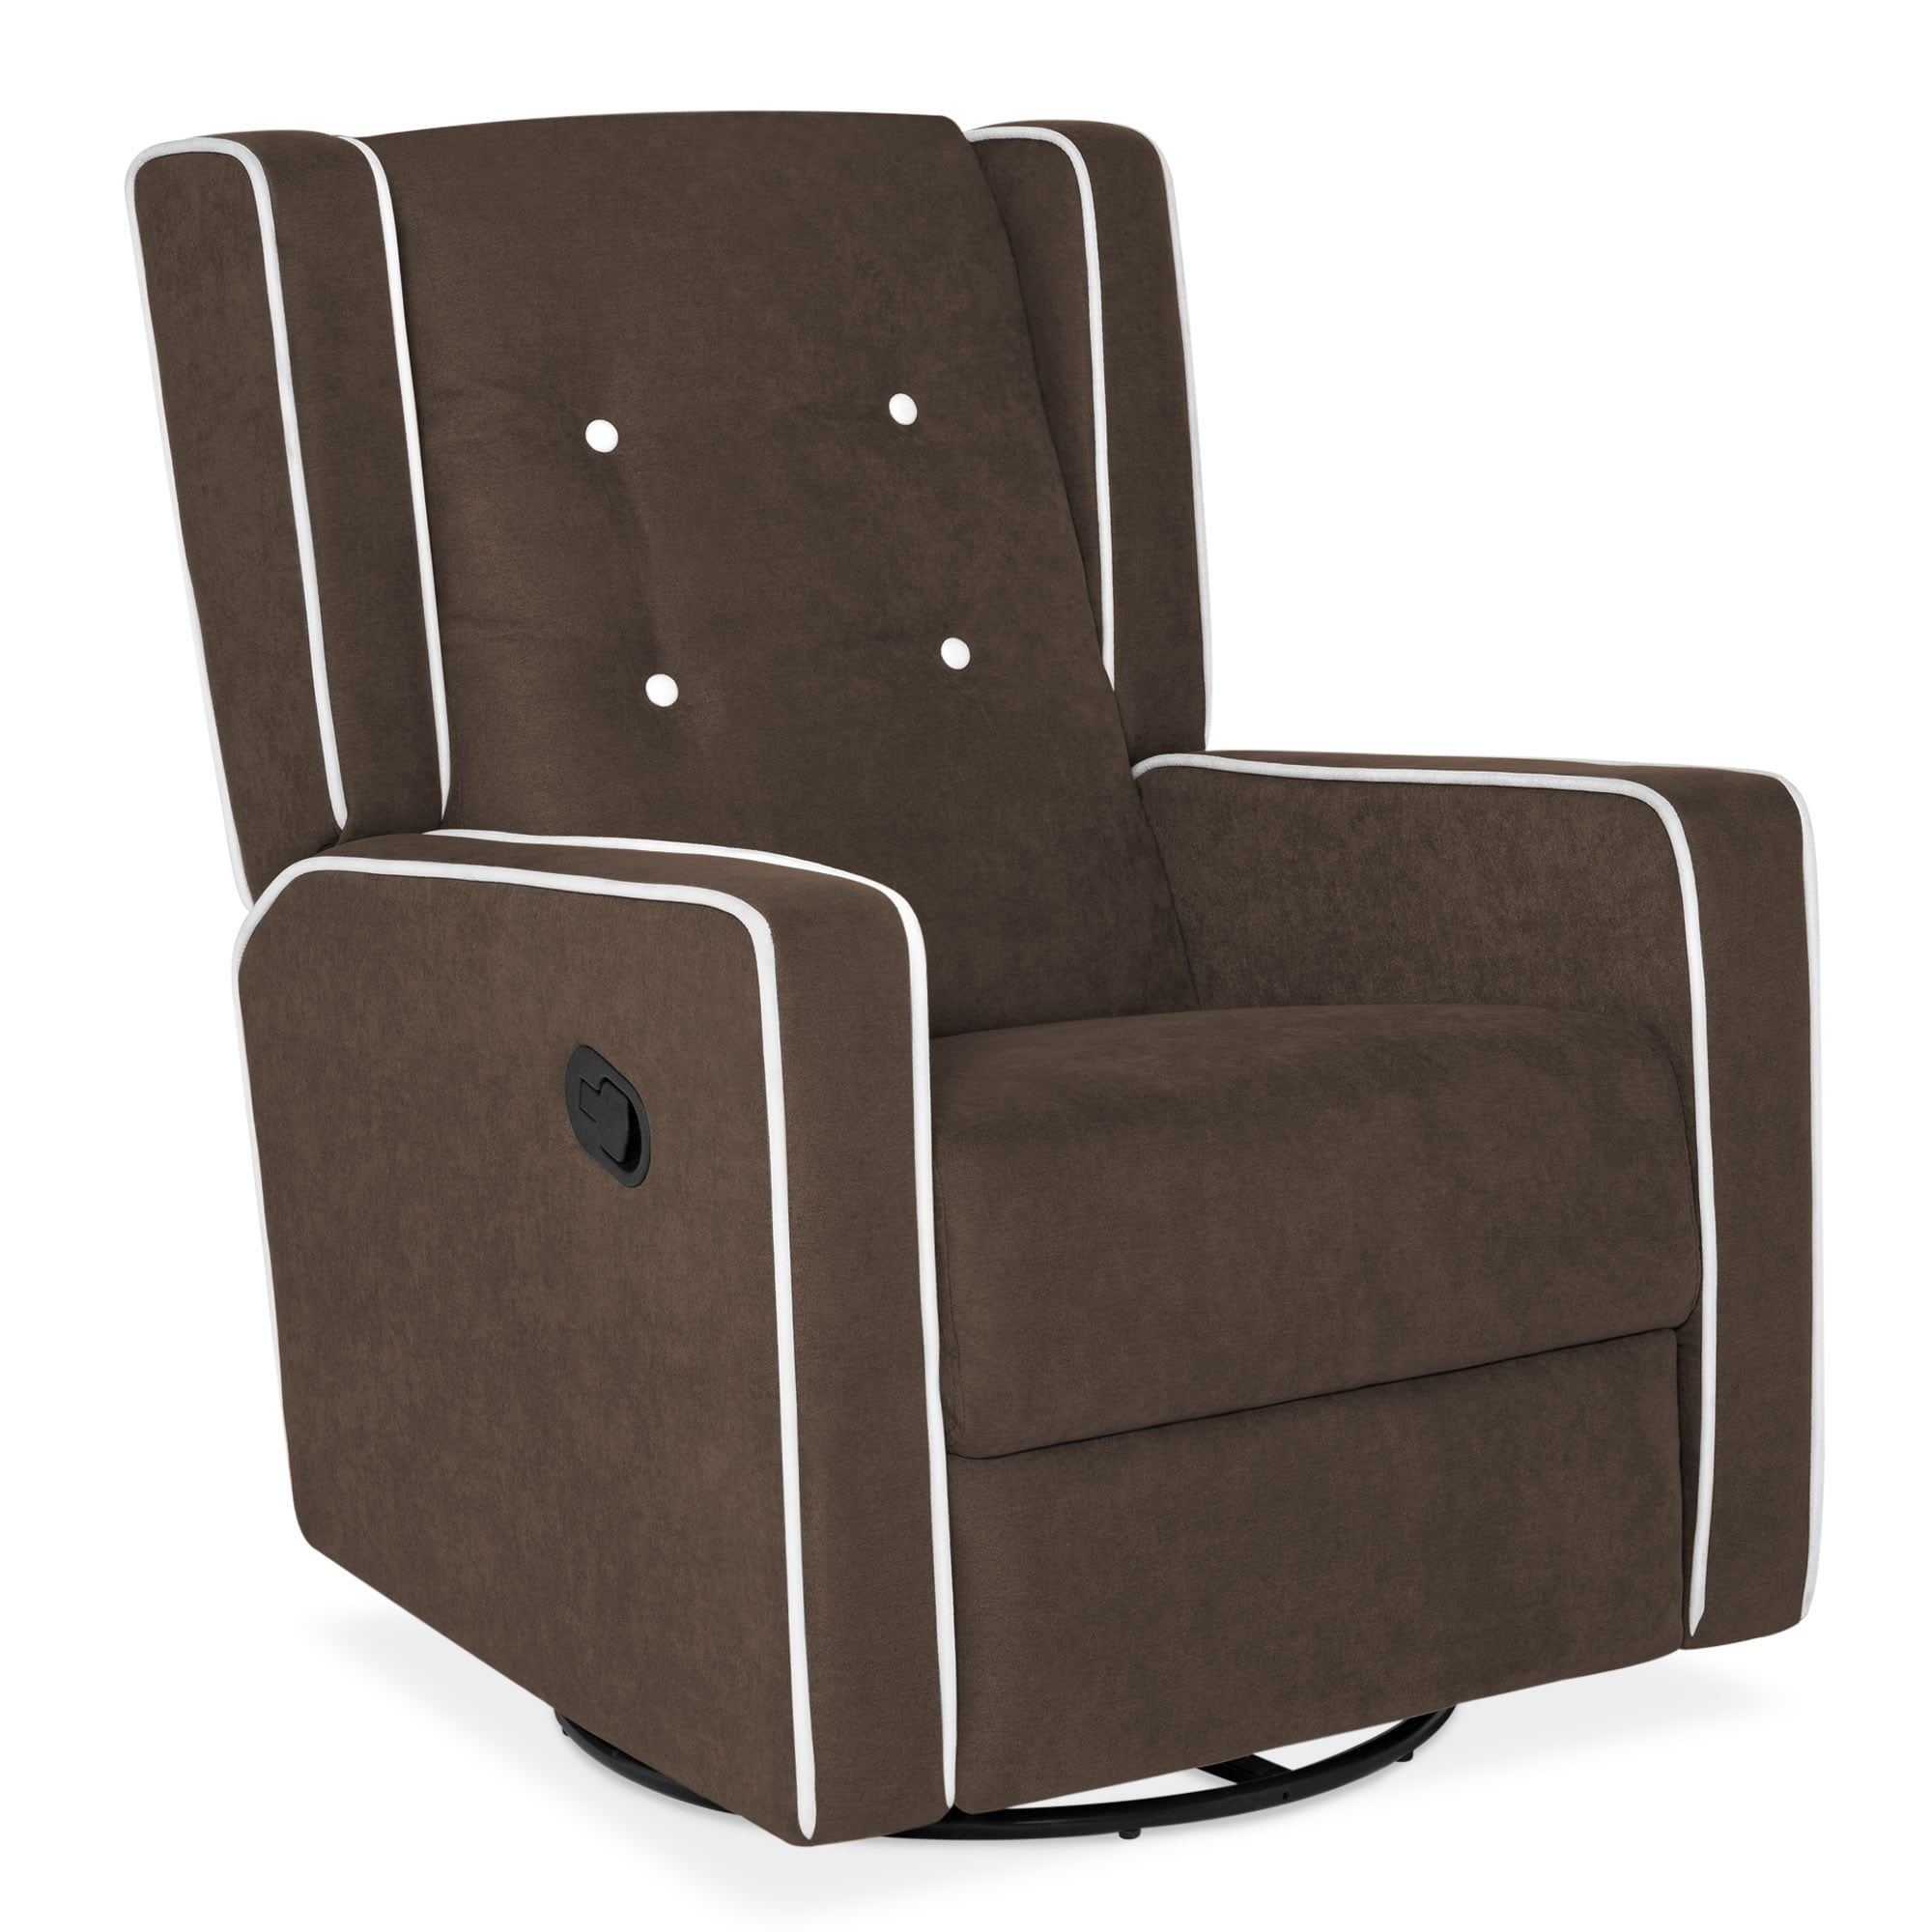 Best Choice Products Mid Century Tufted Velvet Upholstered Recliner Within Modern Velvet Upholstered Recliner Chairs (Gallery 7 of 20)